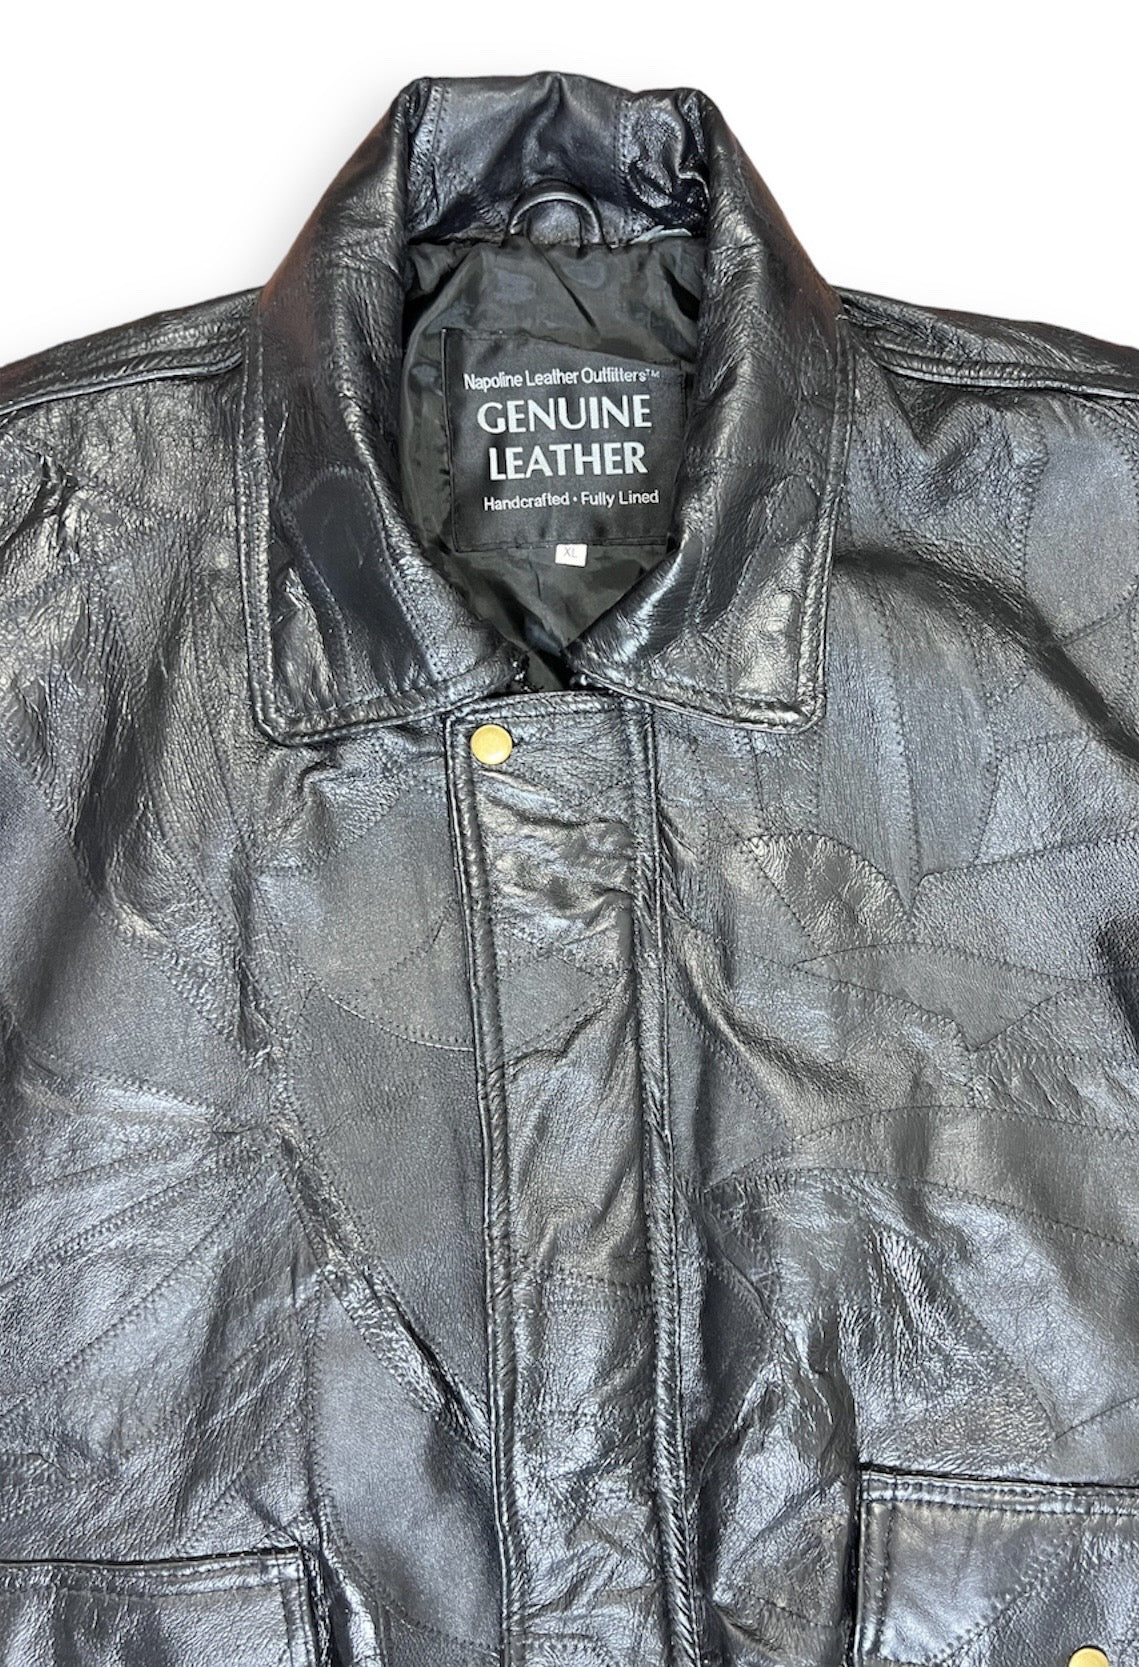 Napoline Leather Outfitters Genuine Patchwork Leather Bomber Jacket - XL